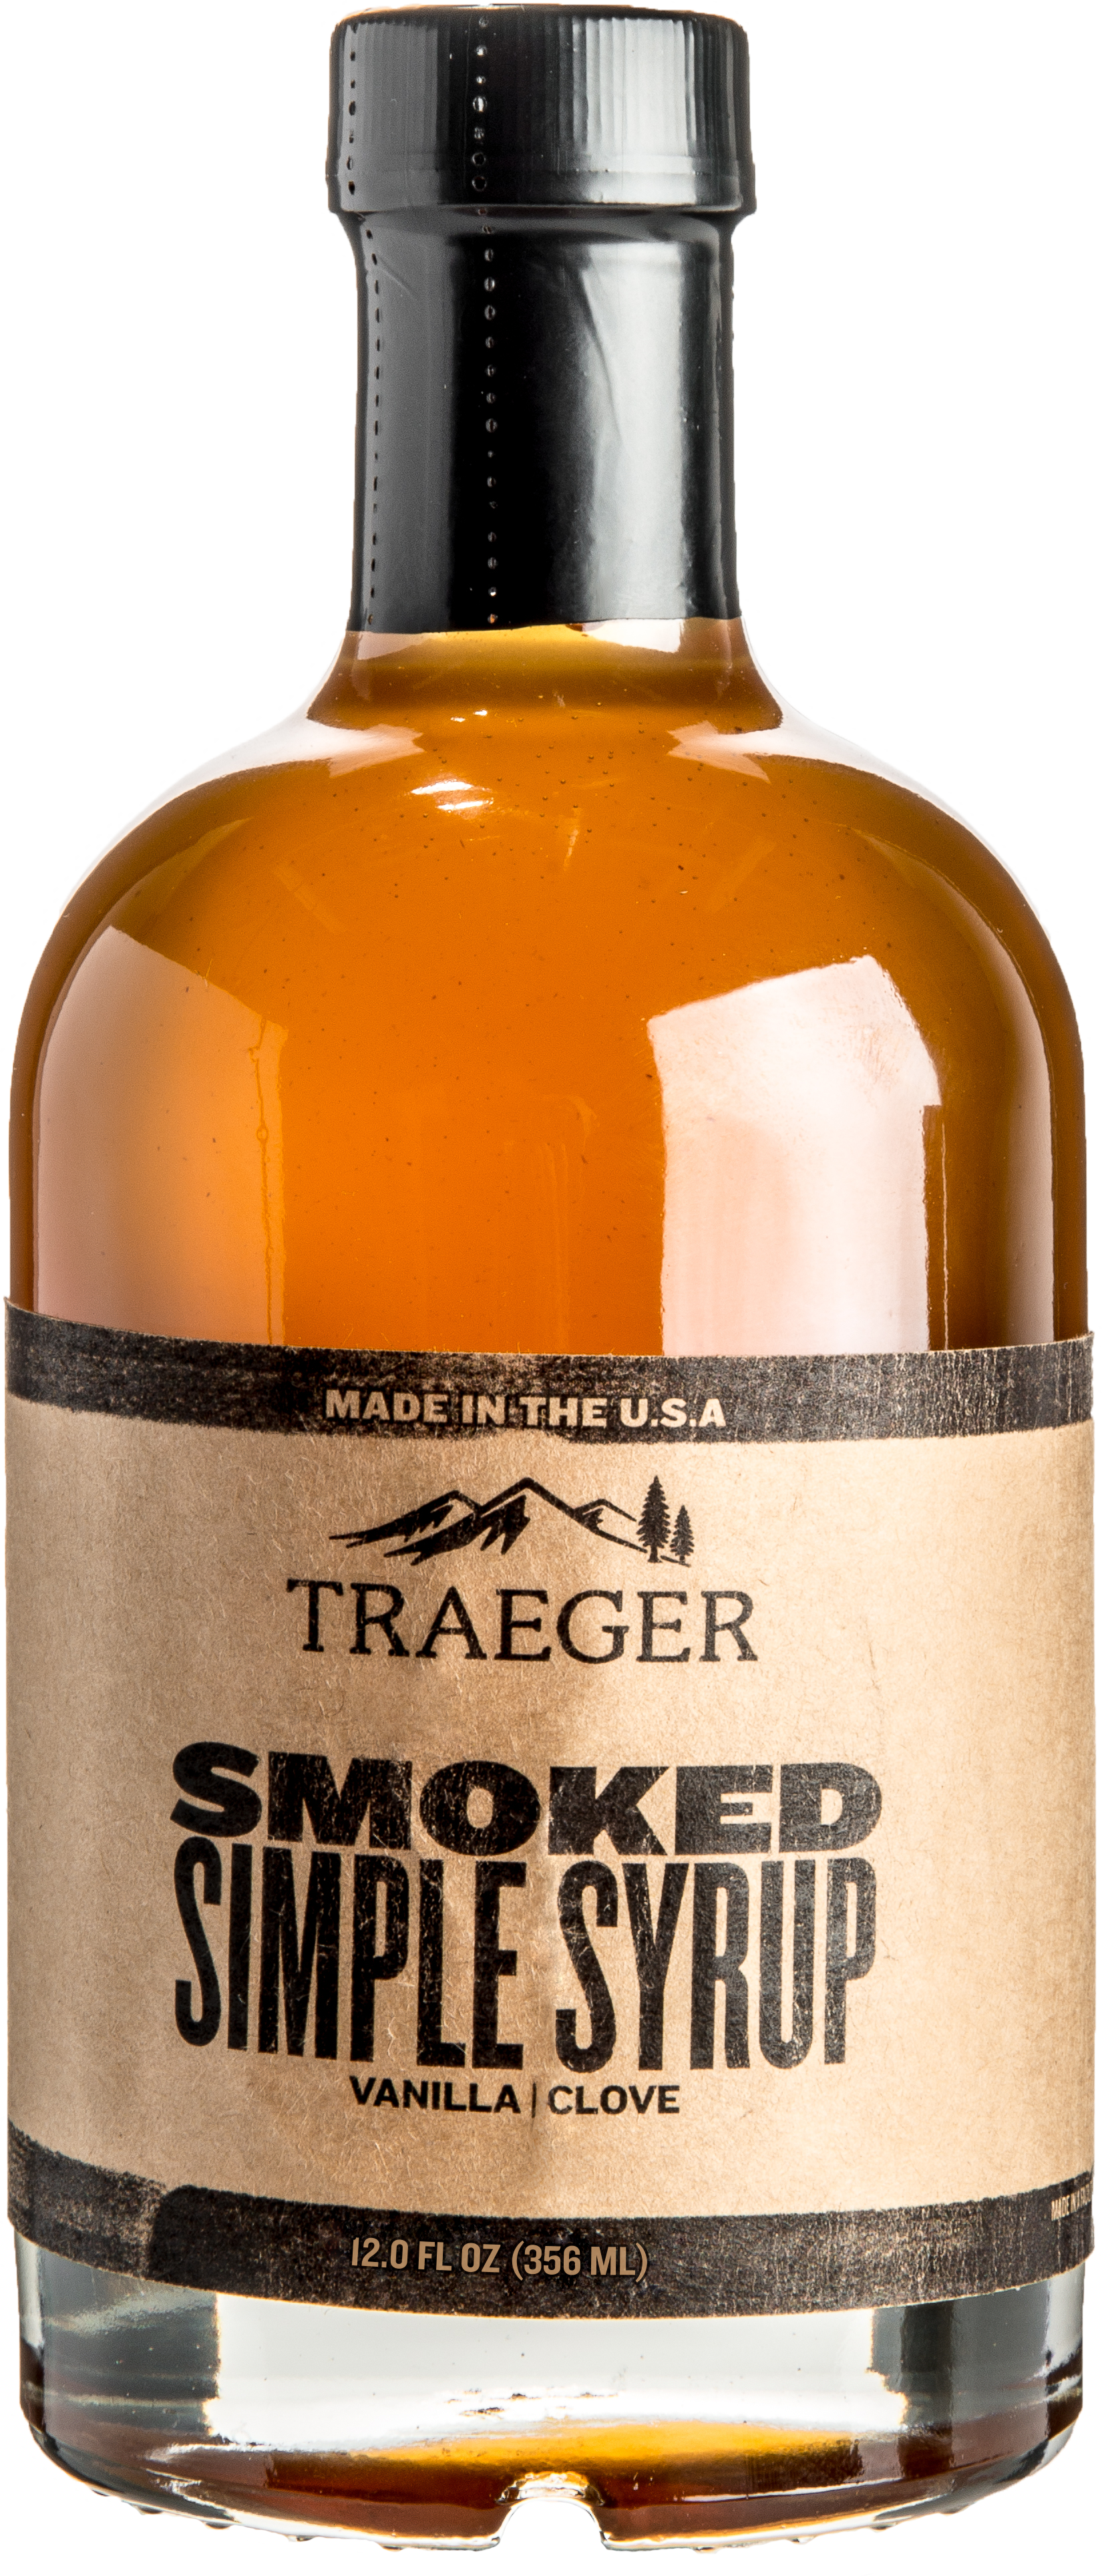 Traeger Smoked Simple Syrup